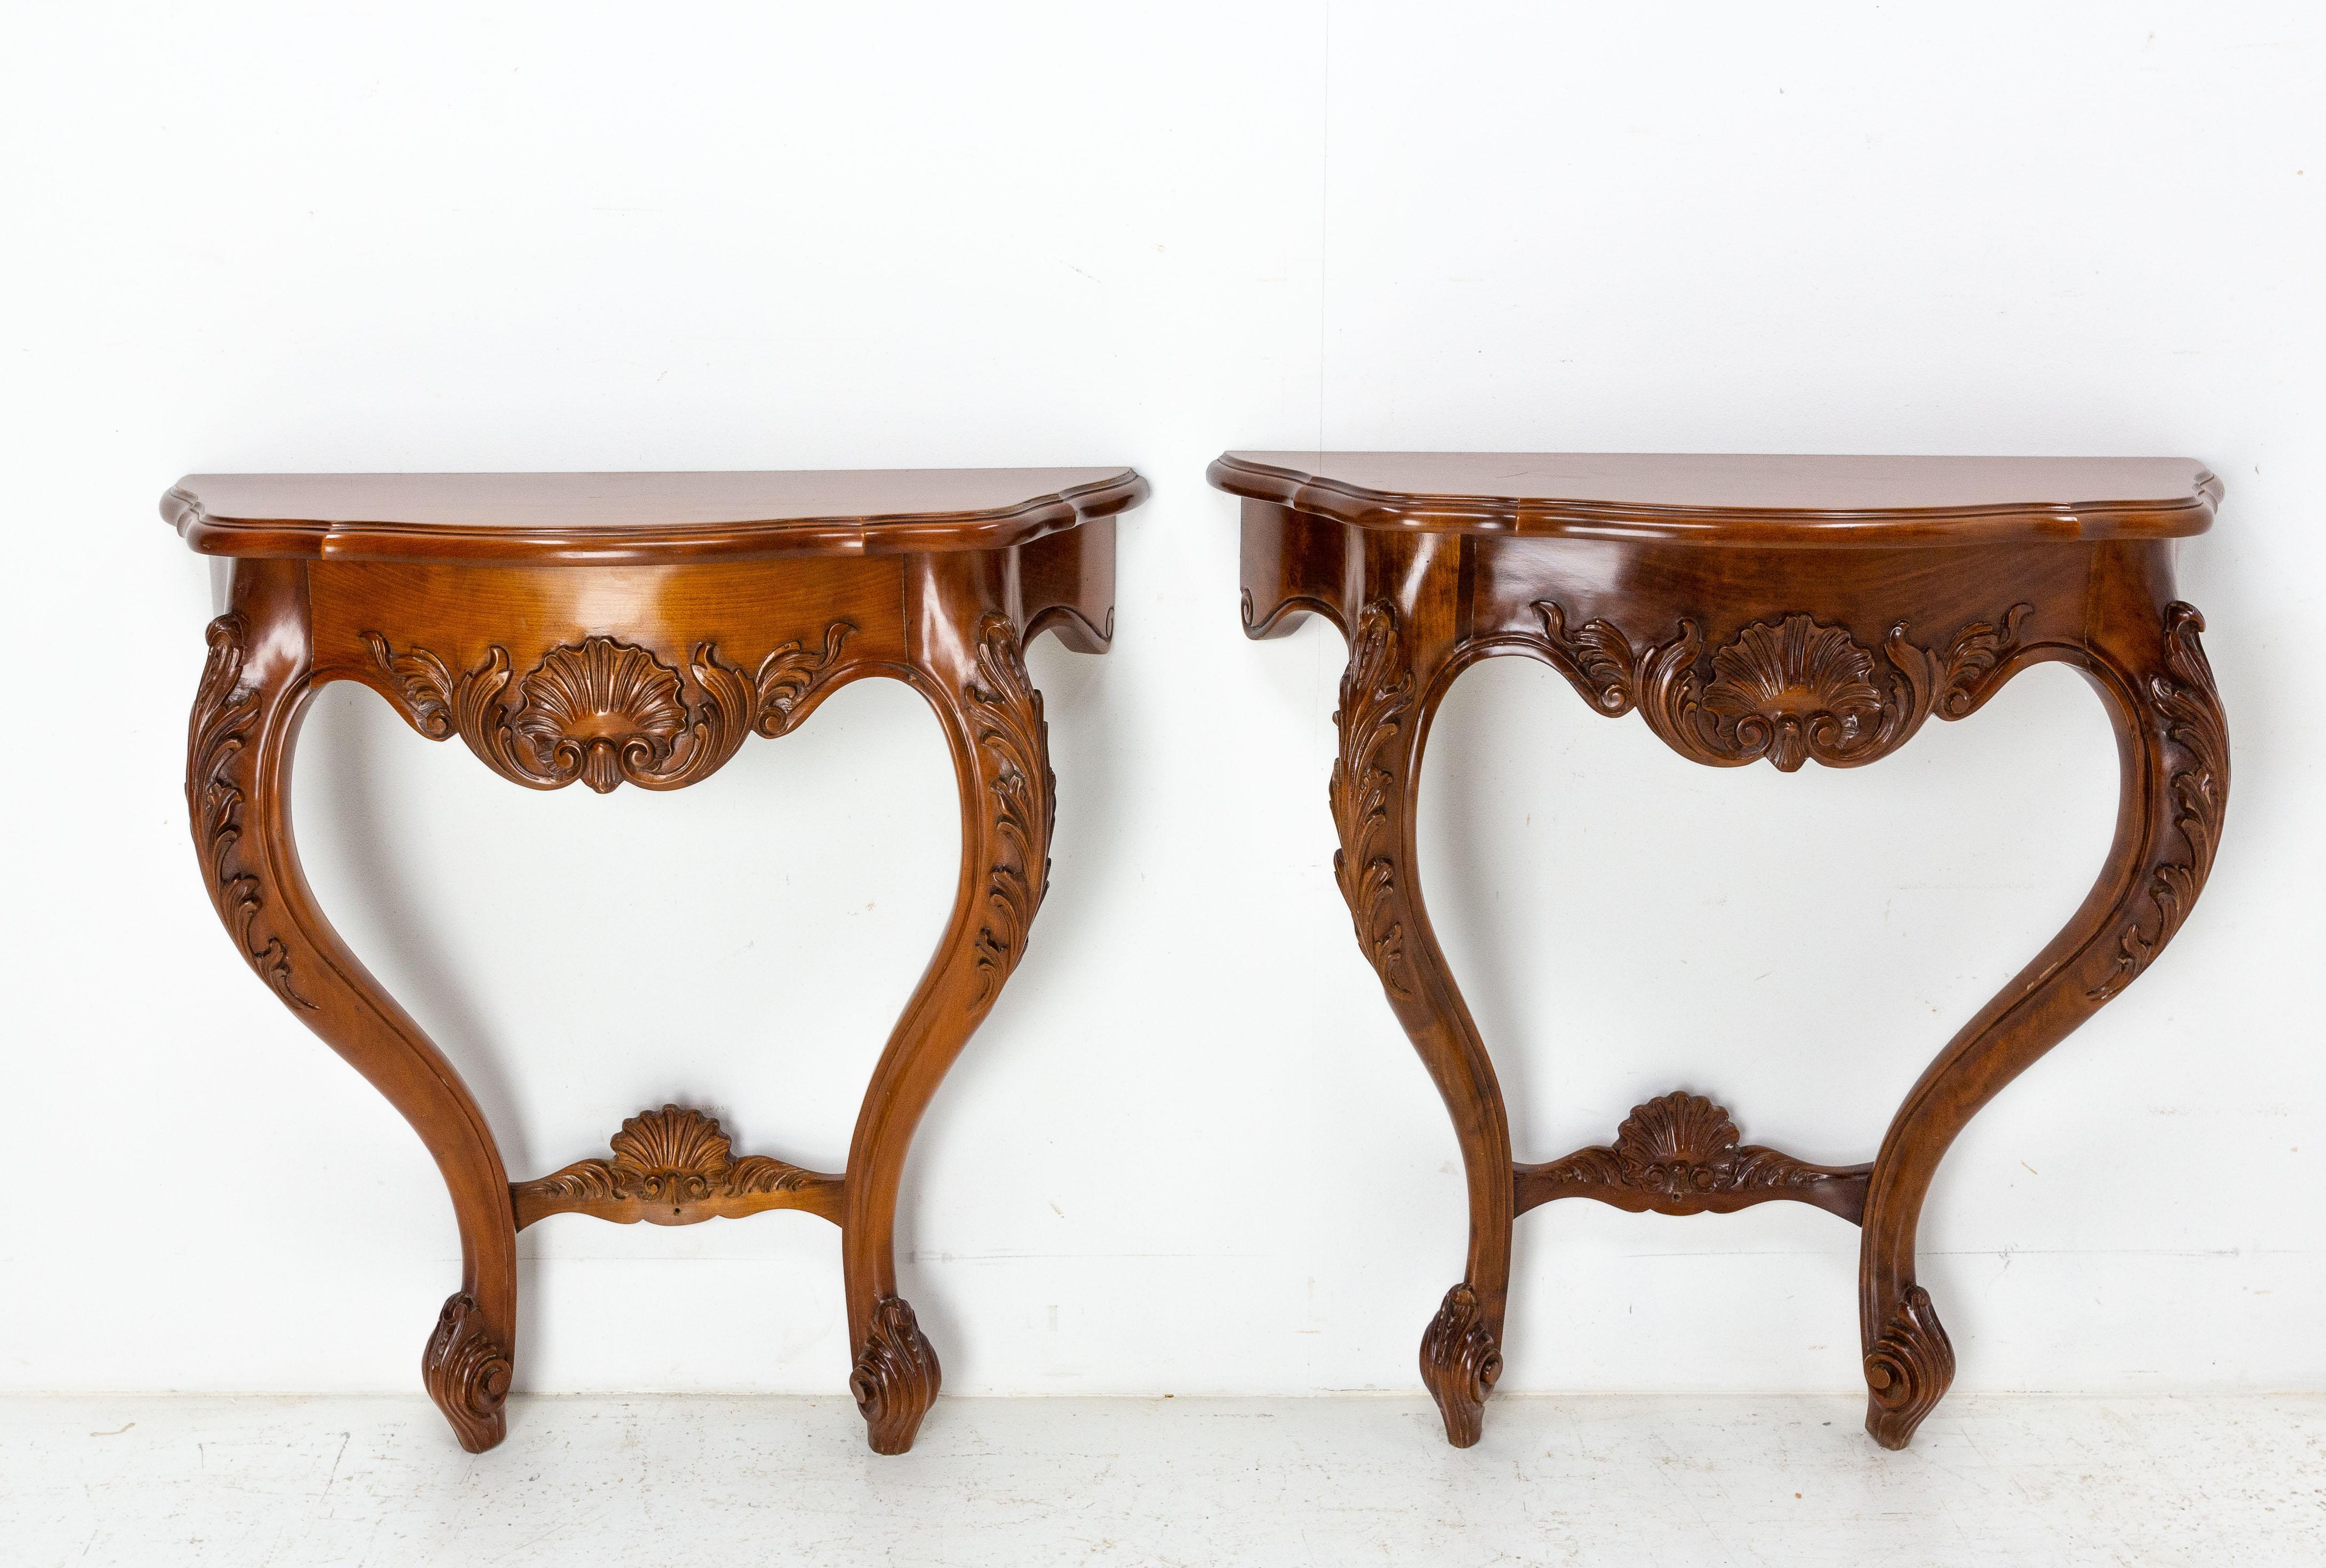 Small pair of console tables unusual demilune wall-mounted shelves, 
Shells and vegetal decoration
Curved feet
Very good condition

Shipping:
L81 P40 H86 17kg